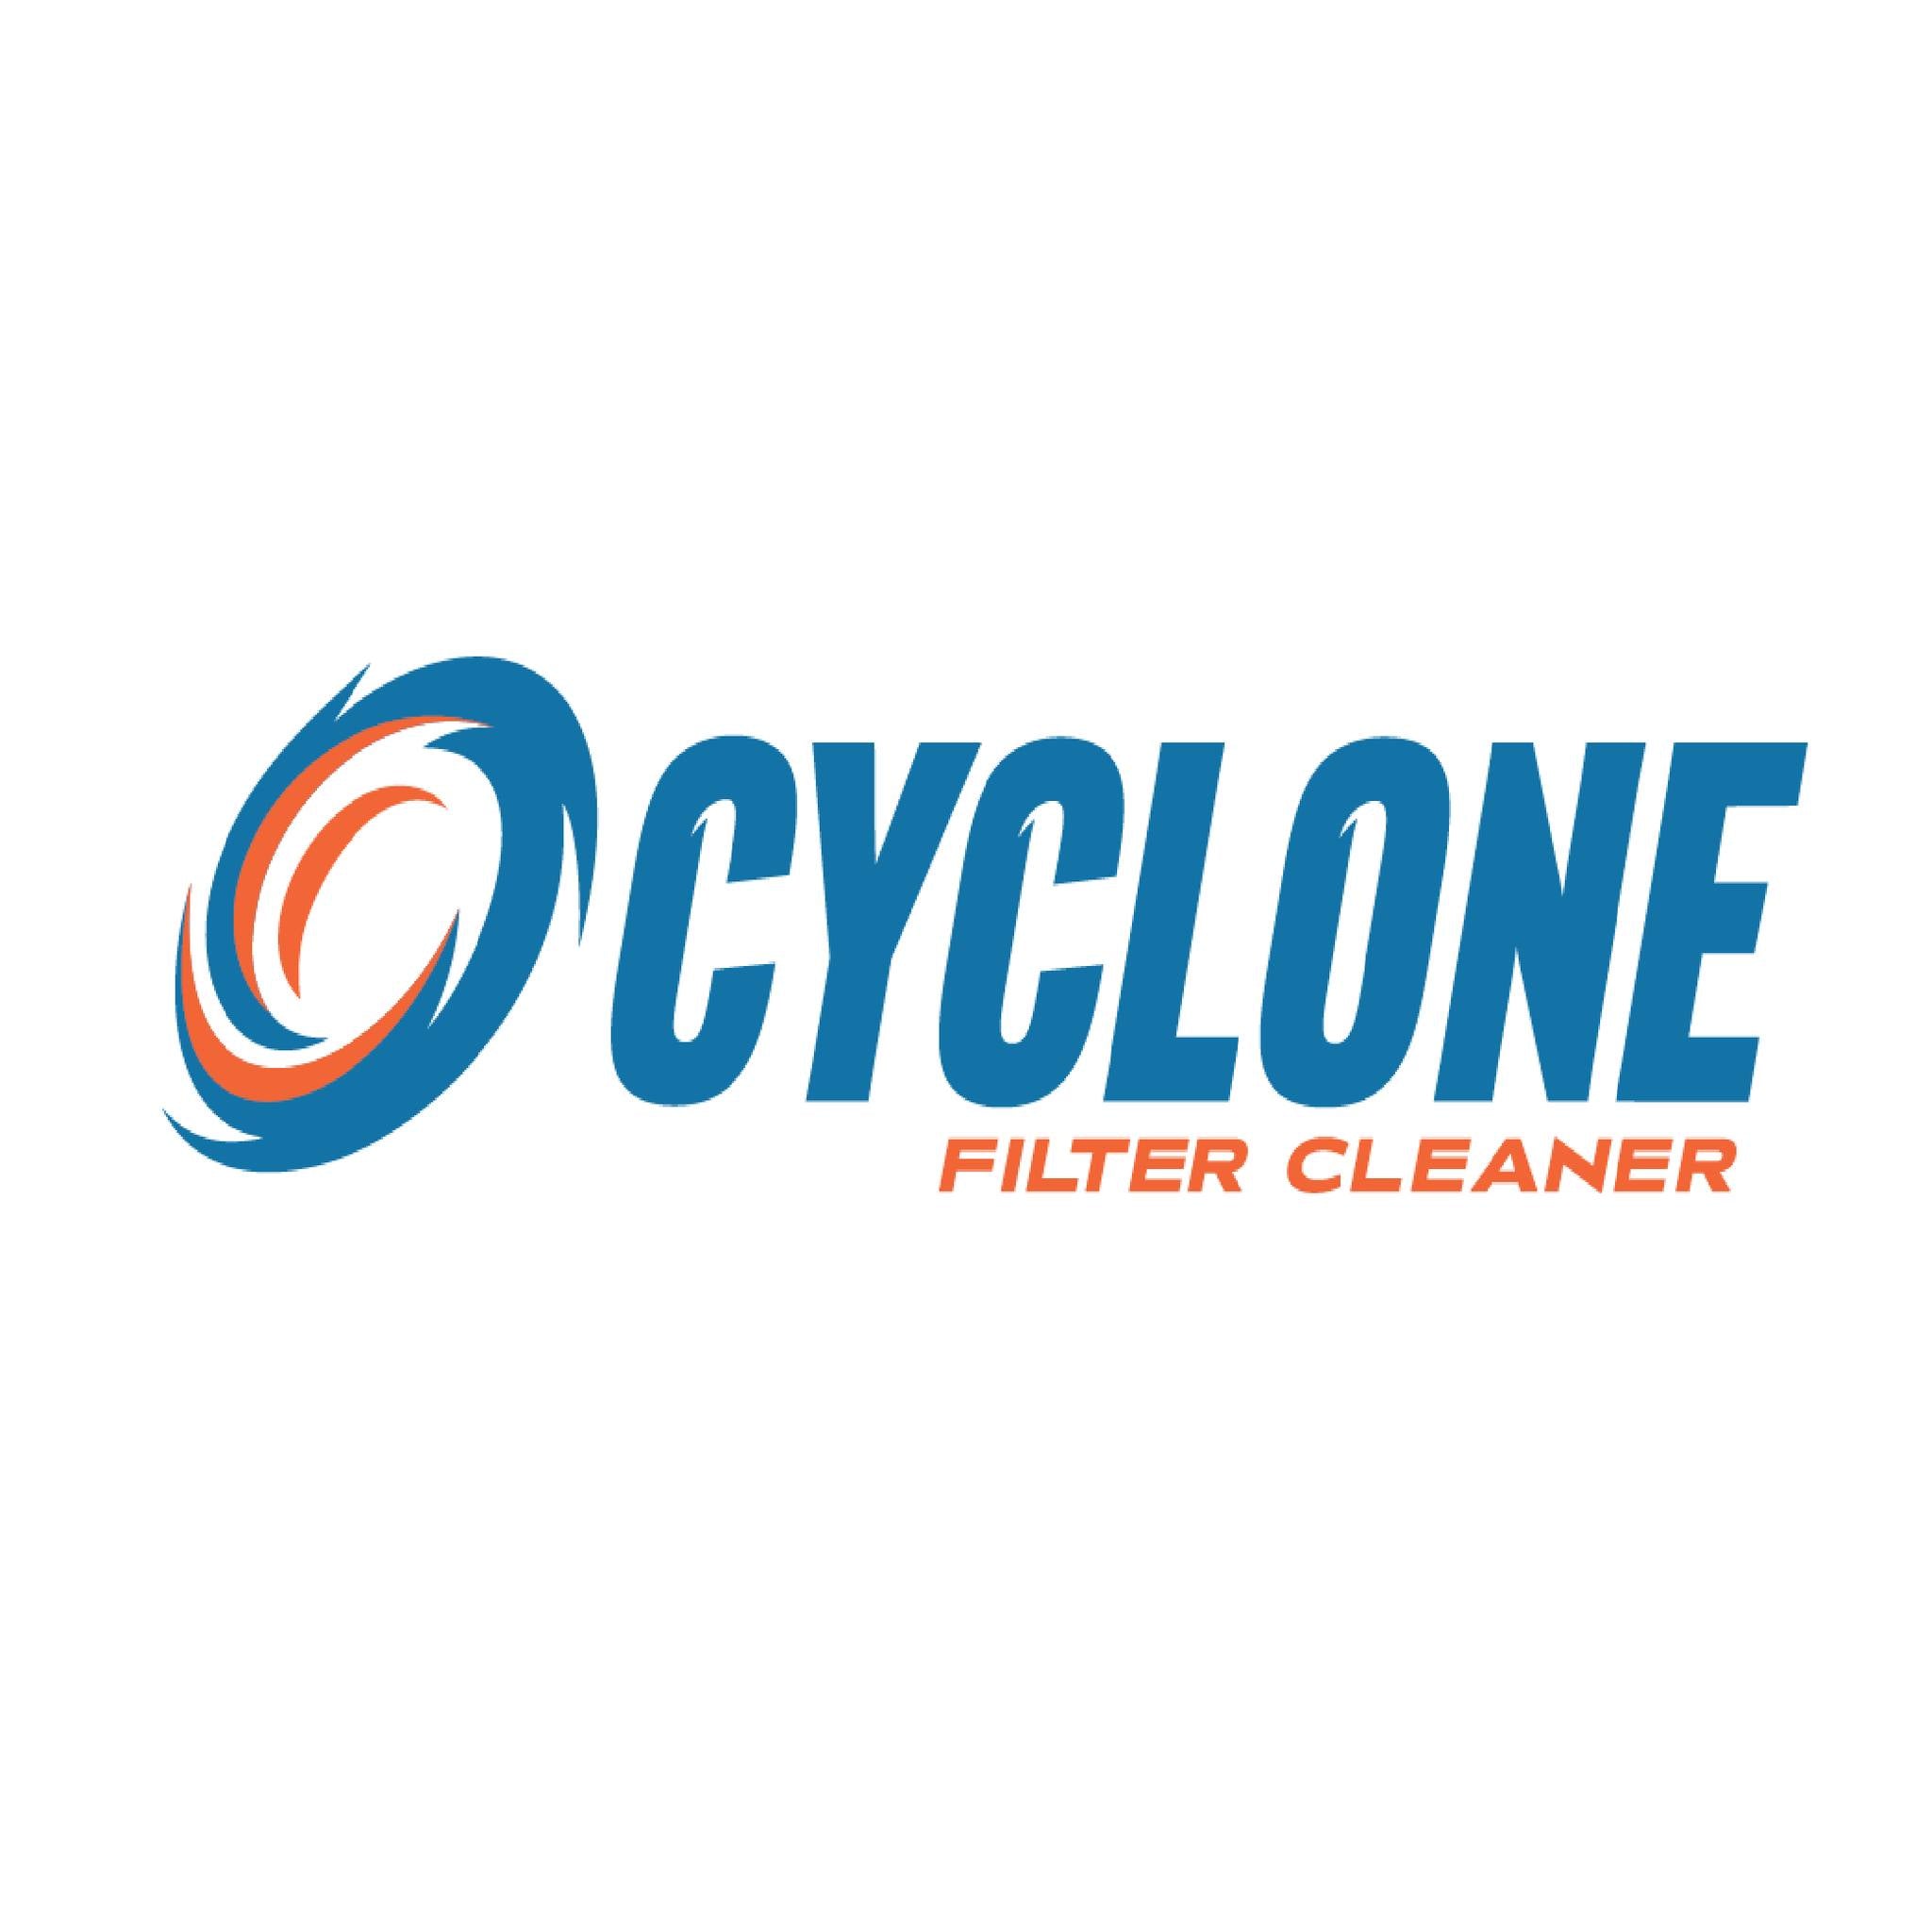 The Cyclone Filter Cleaner System @ The Pool Supply Warehouse